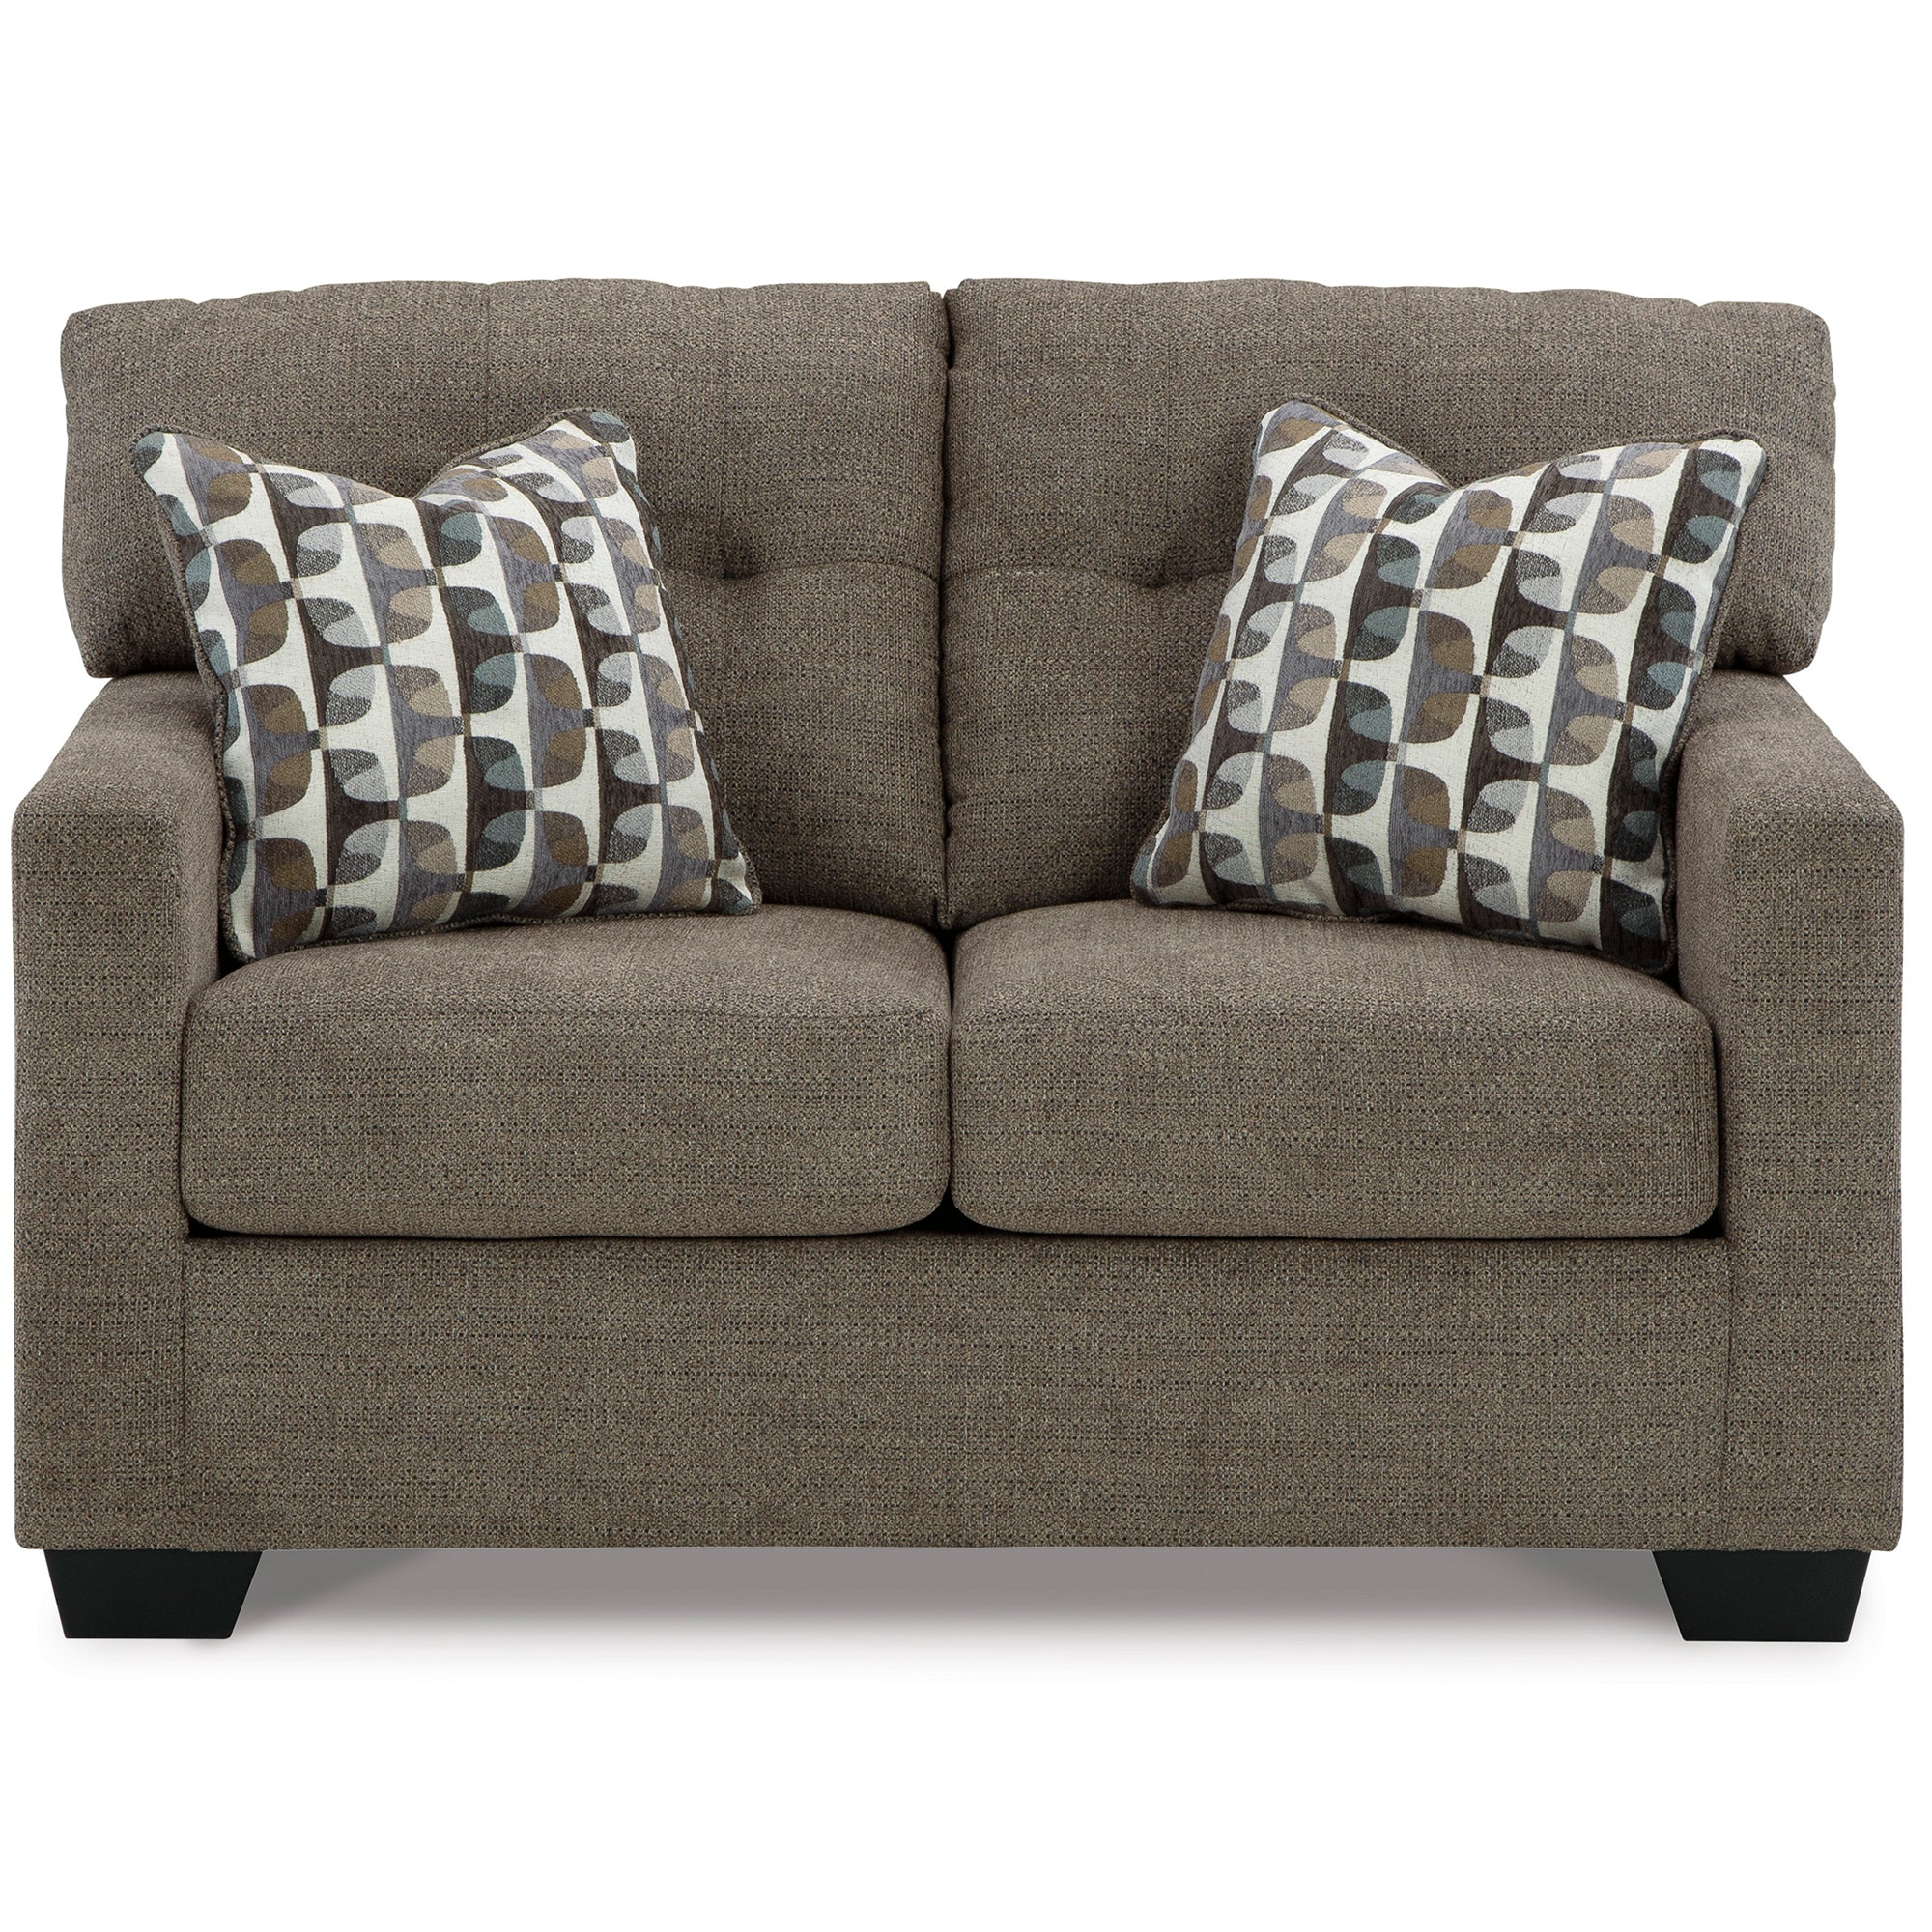 Cozy Mahoney Loveseat in rich chocolate color, ideal for intimate seating arrangements